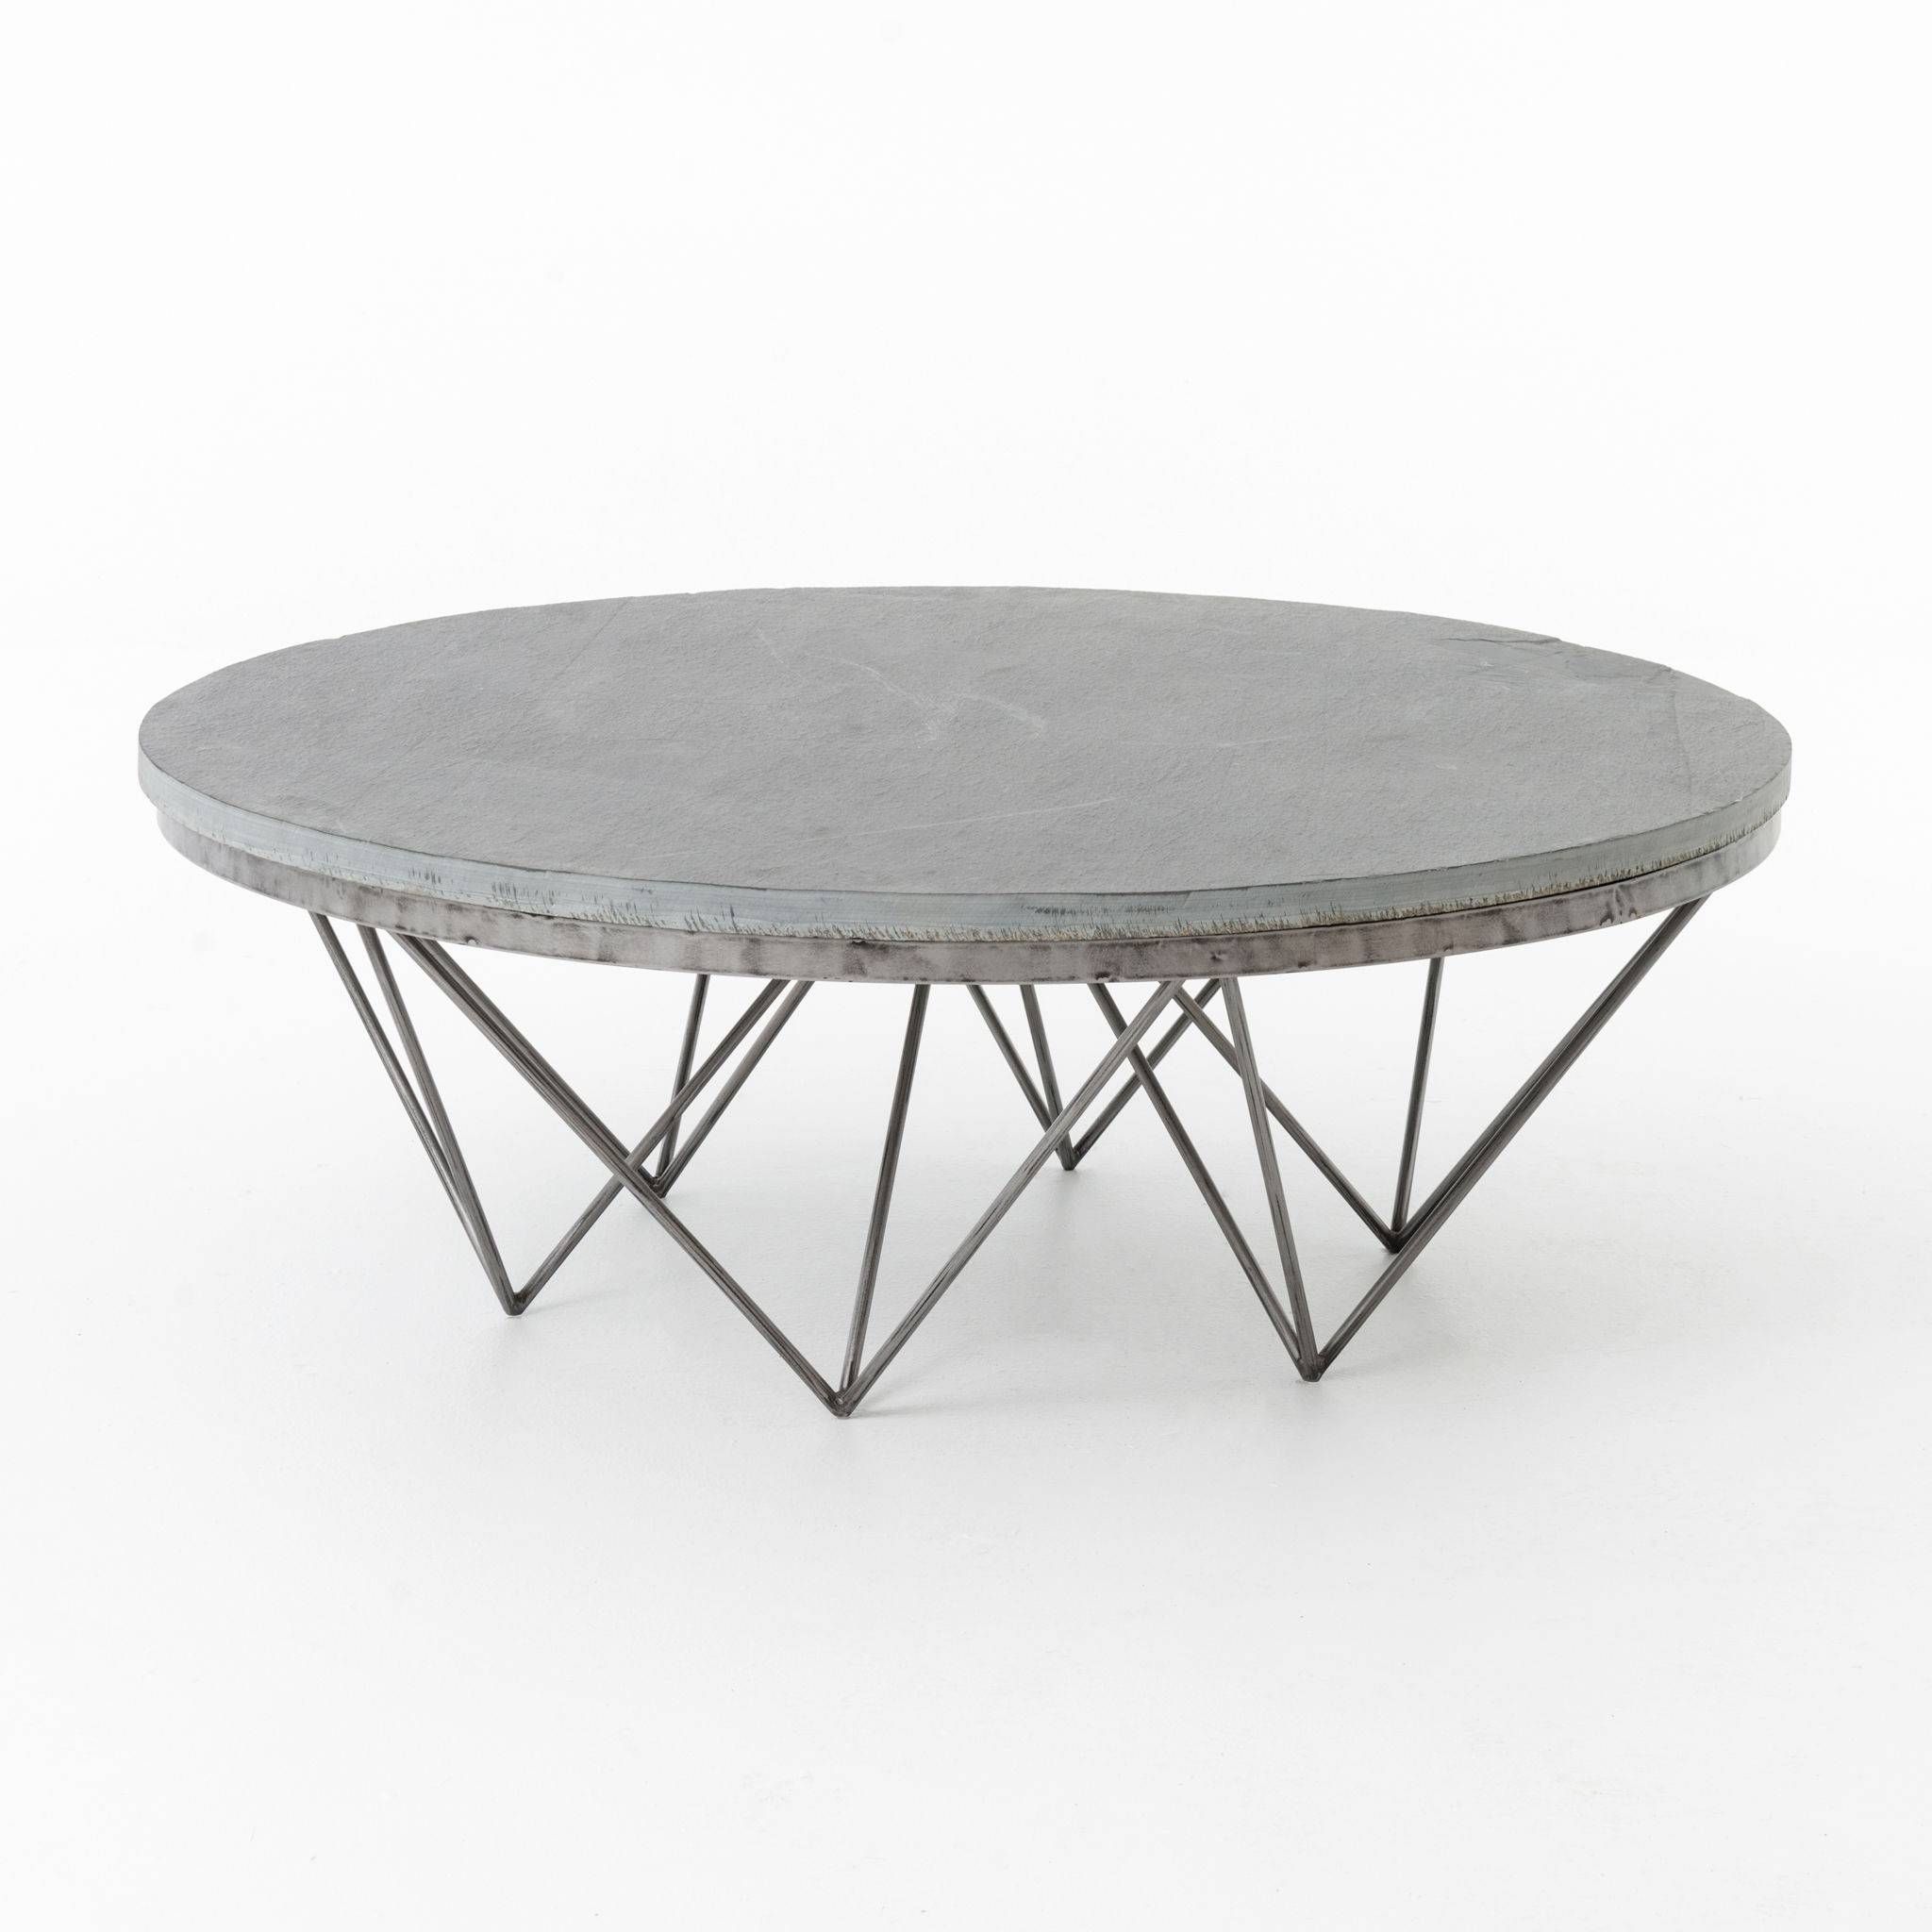 The Most Coffee Table Round Black Throughout Round Black Coffee Within Chrome Leg Coffee Tables (View 22 of 30)